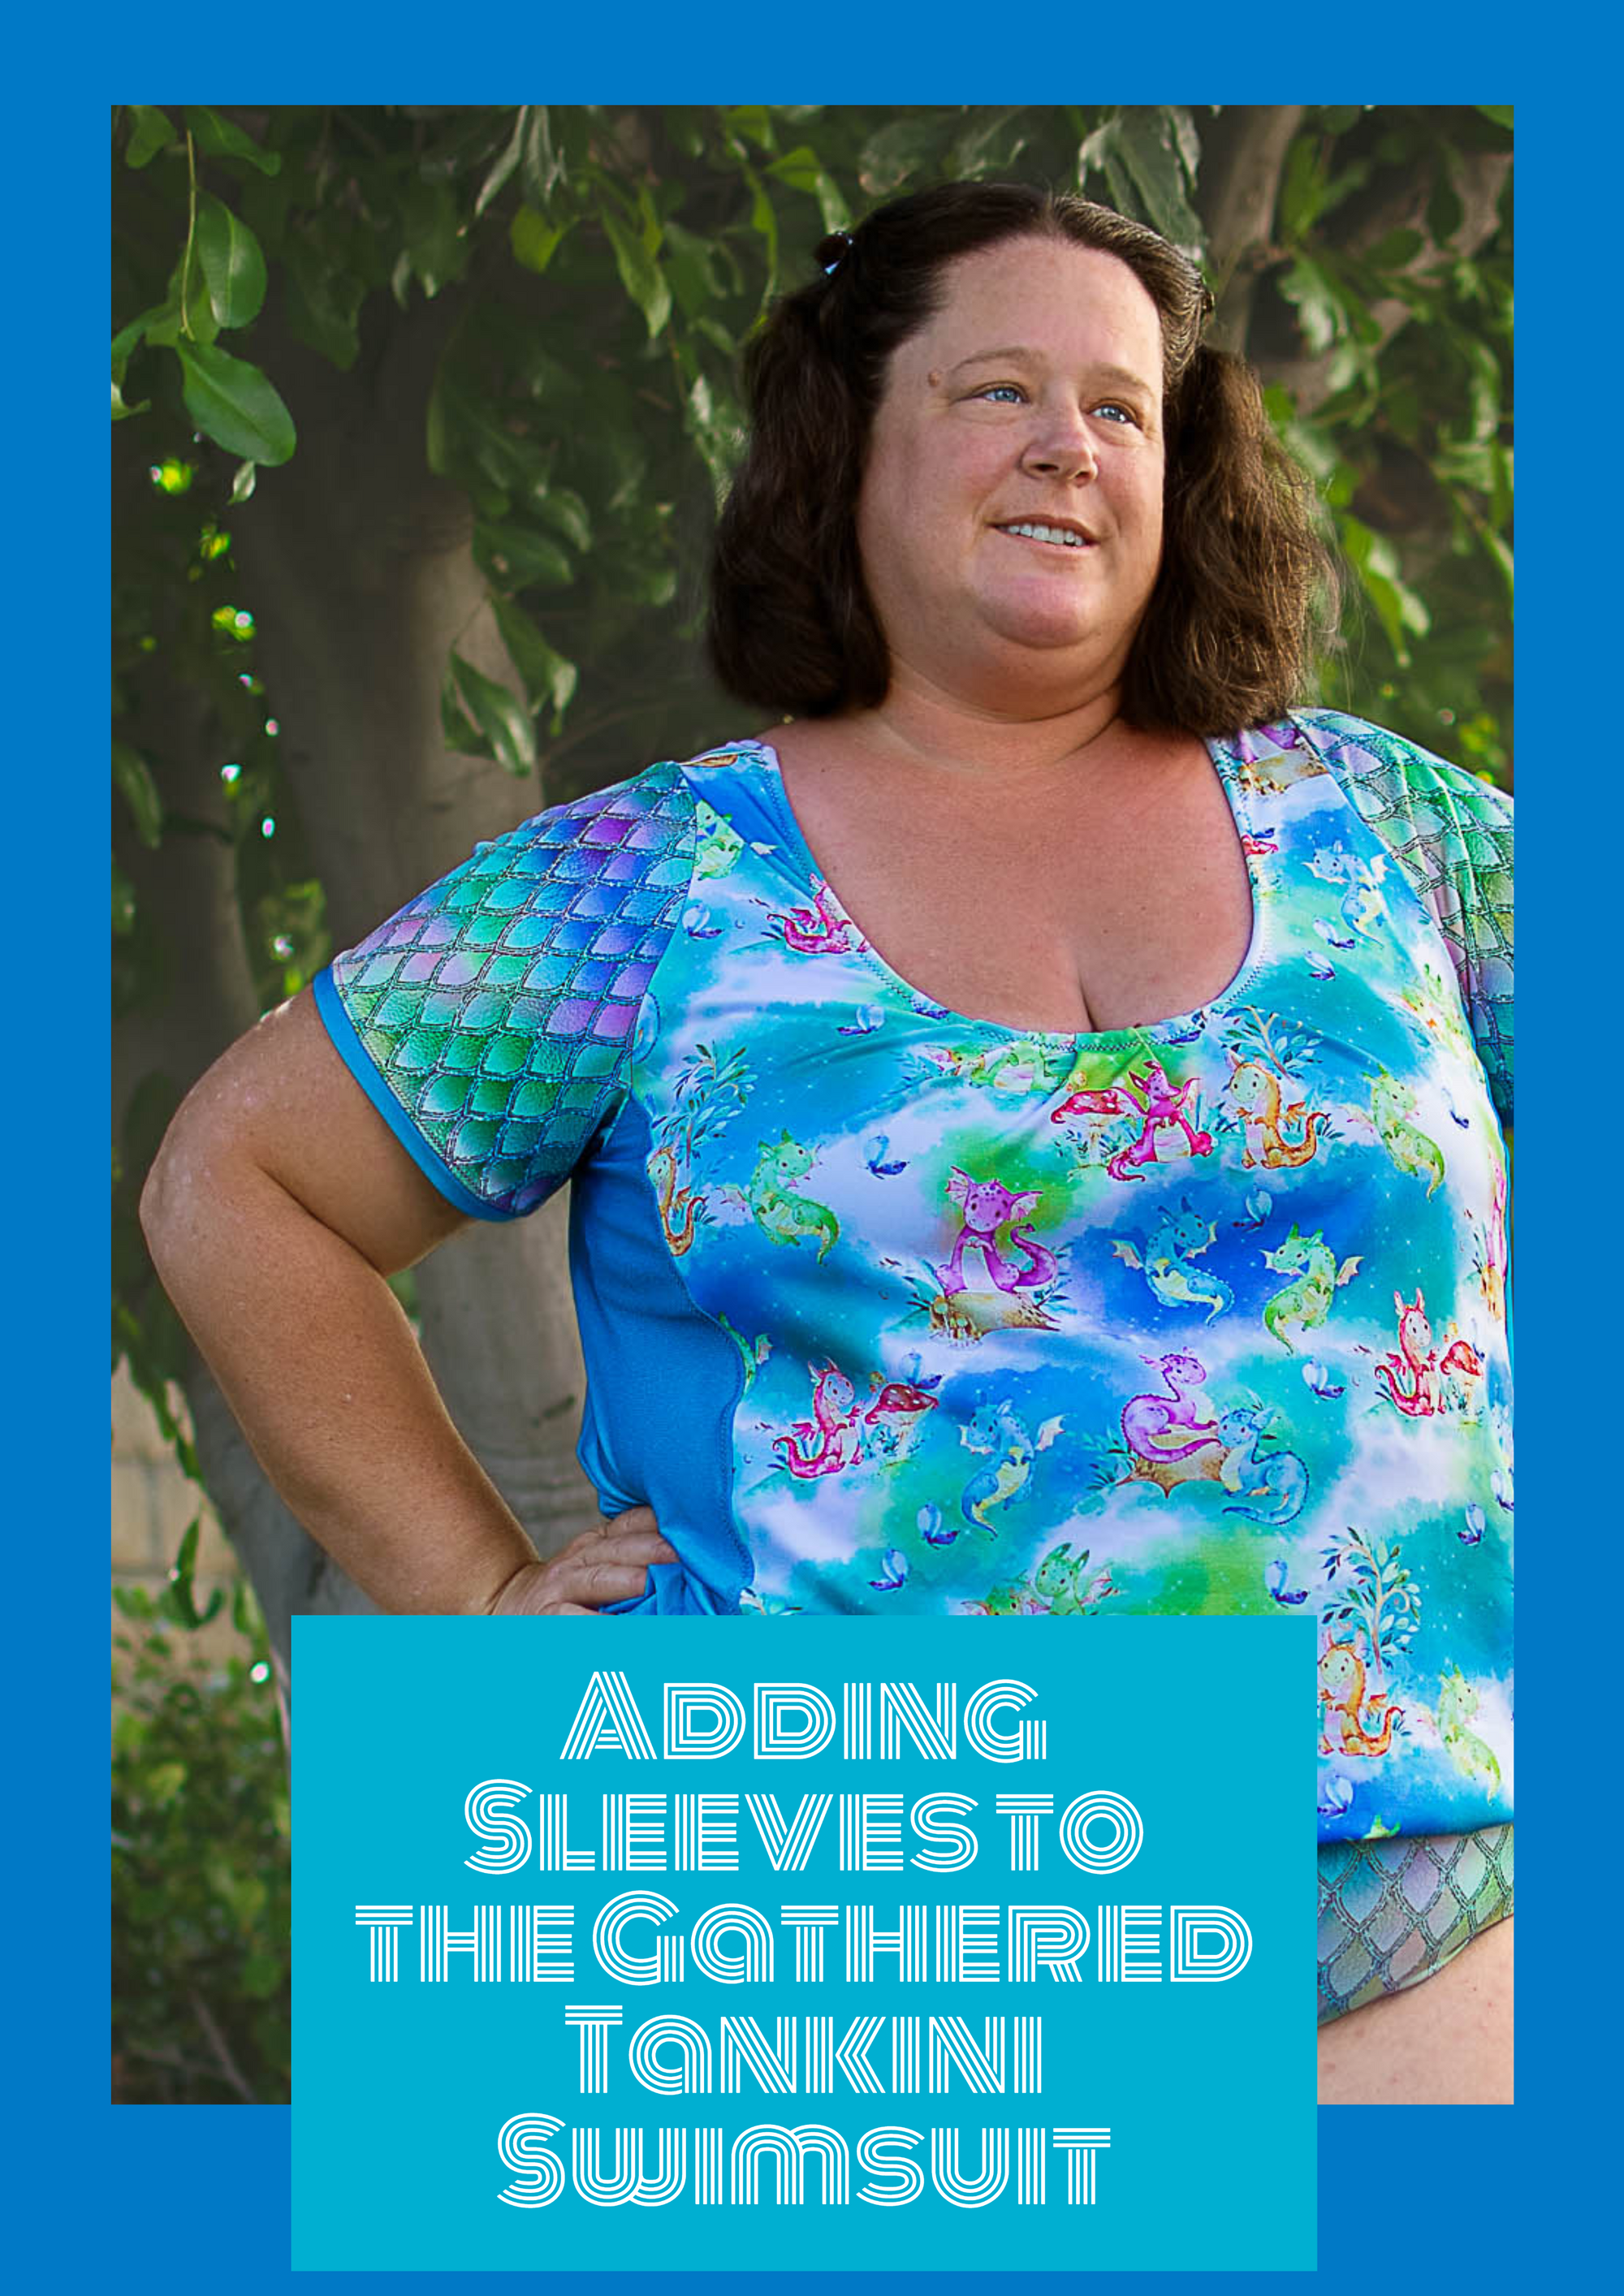 Adding Sleeves to the Gathered Tankini Swimsuit